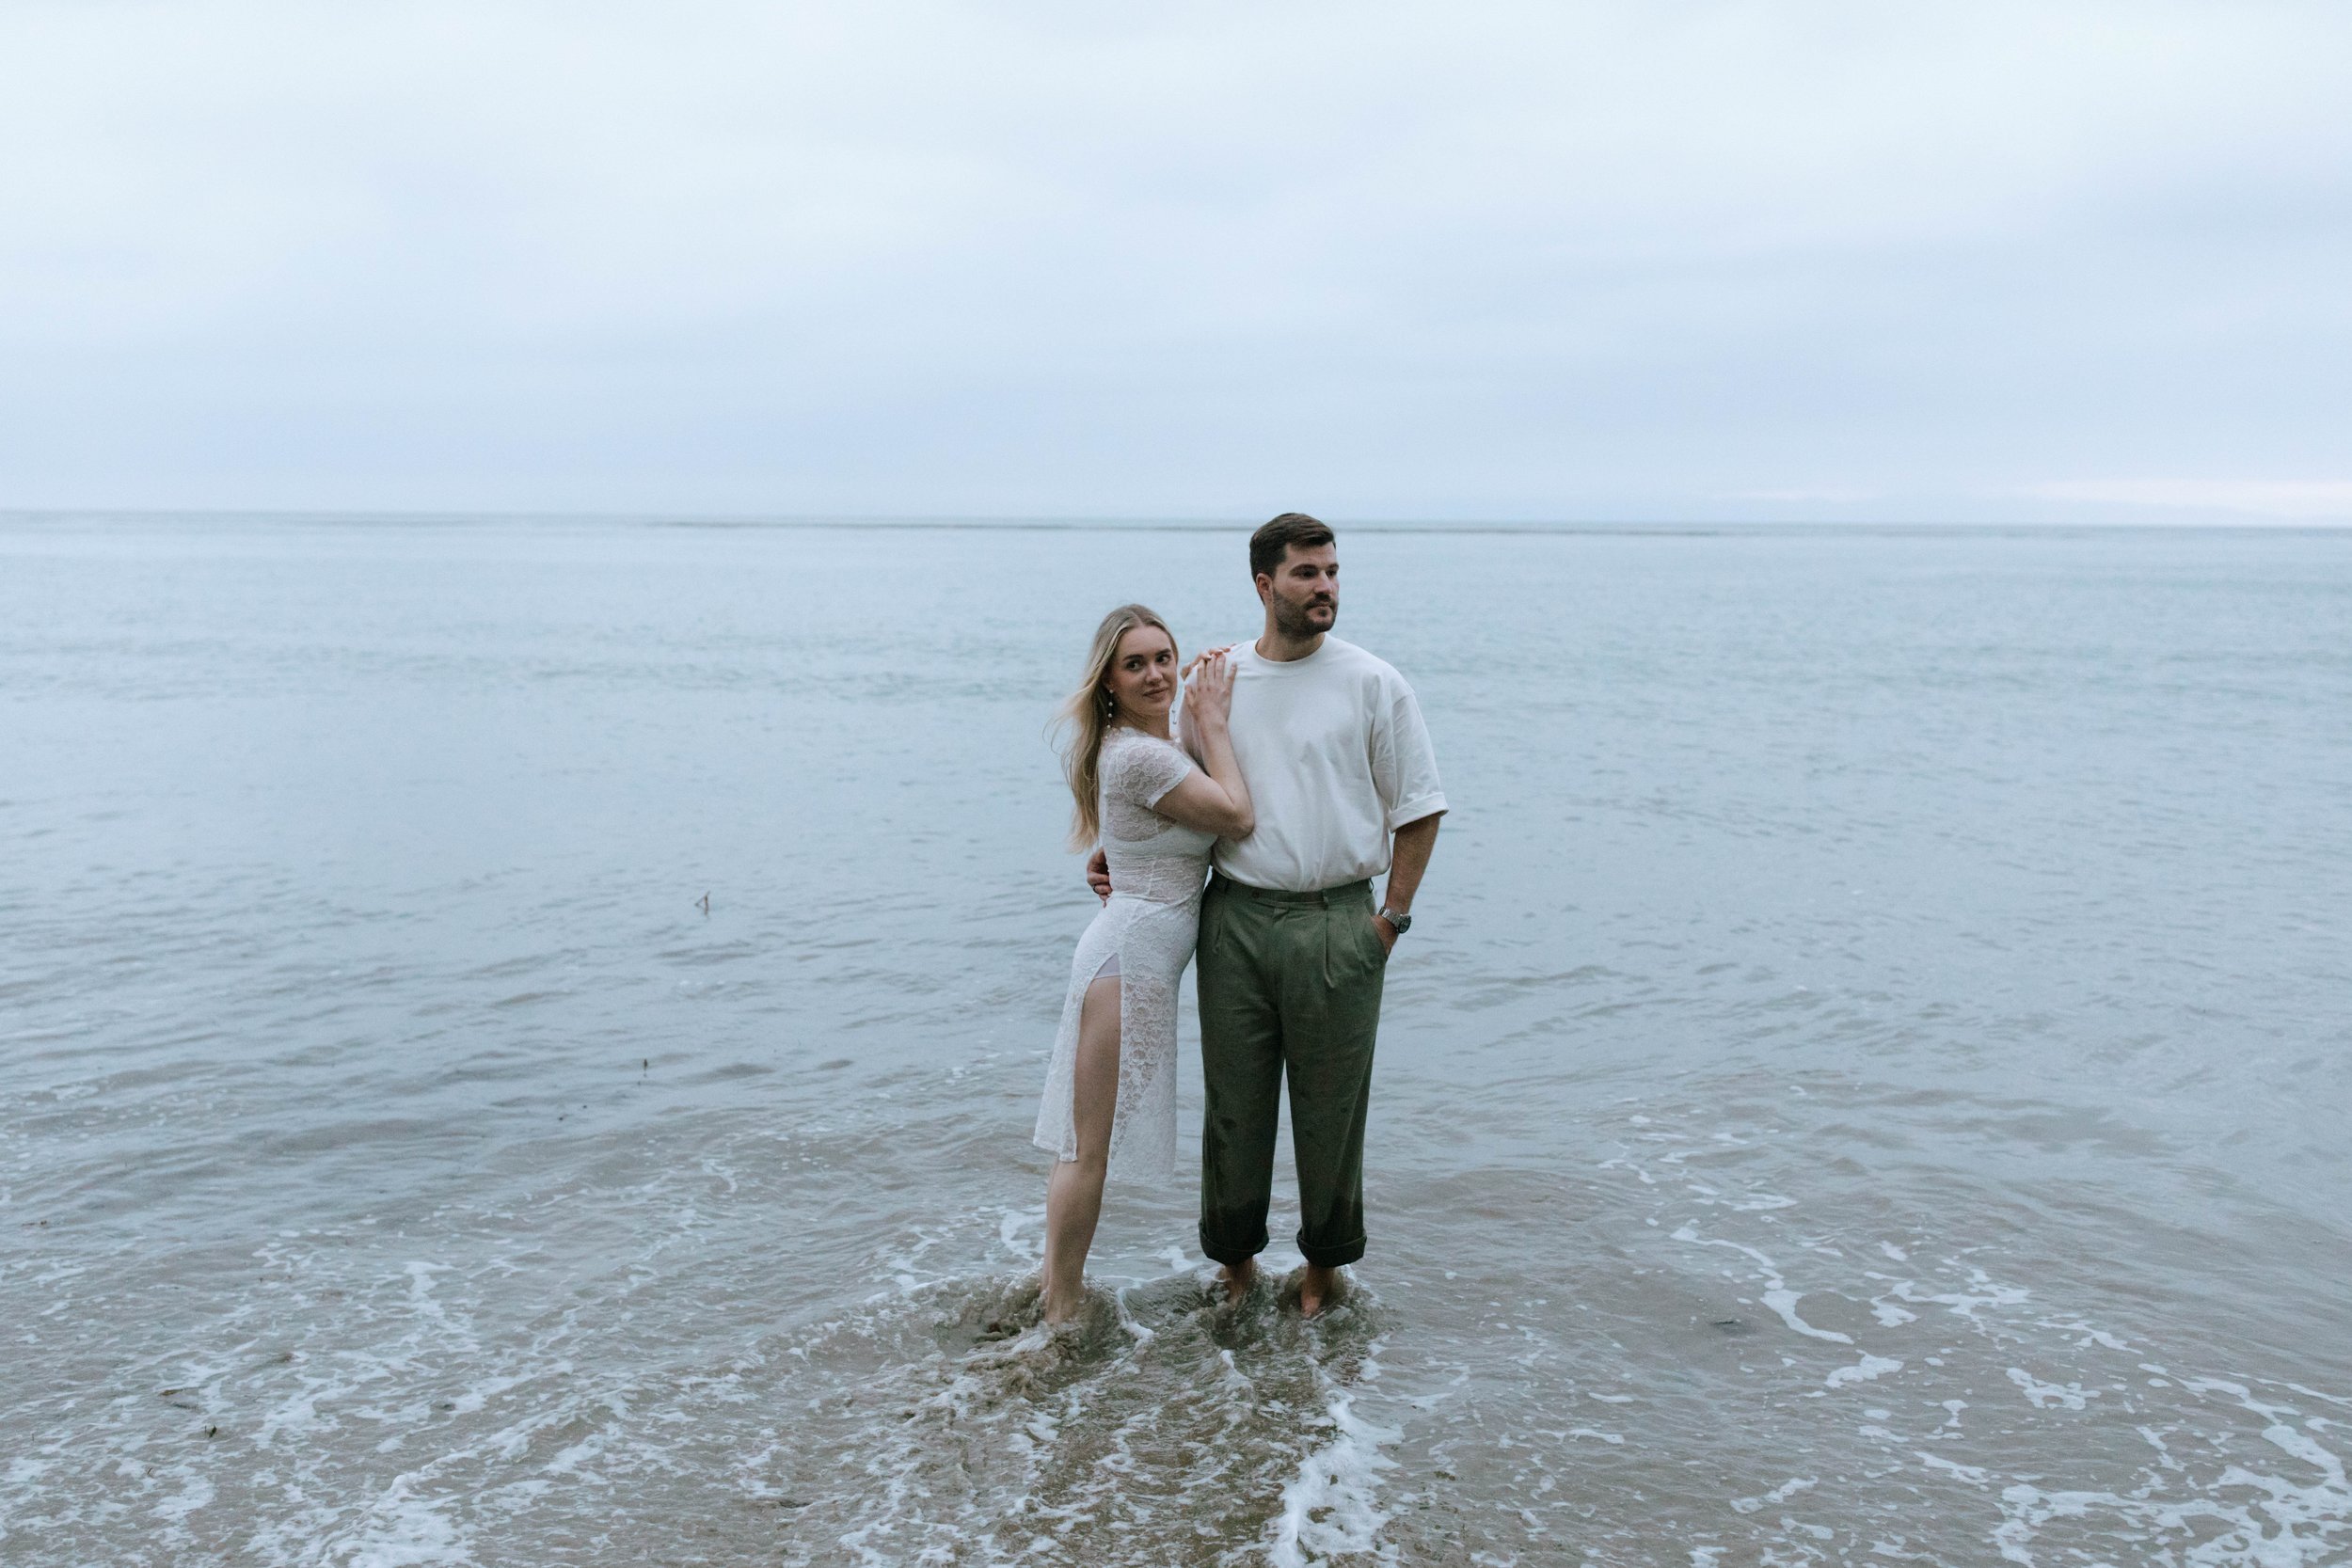  www.santabarbarawedding.com | Monique Bianca Photography | Santa Barbara Beach | Rotate | Engaged Couple Posing with Their Feet in the Water at the Beach